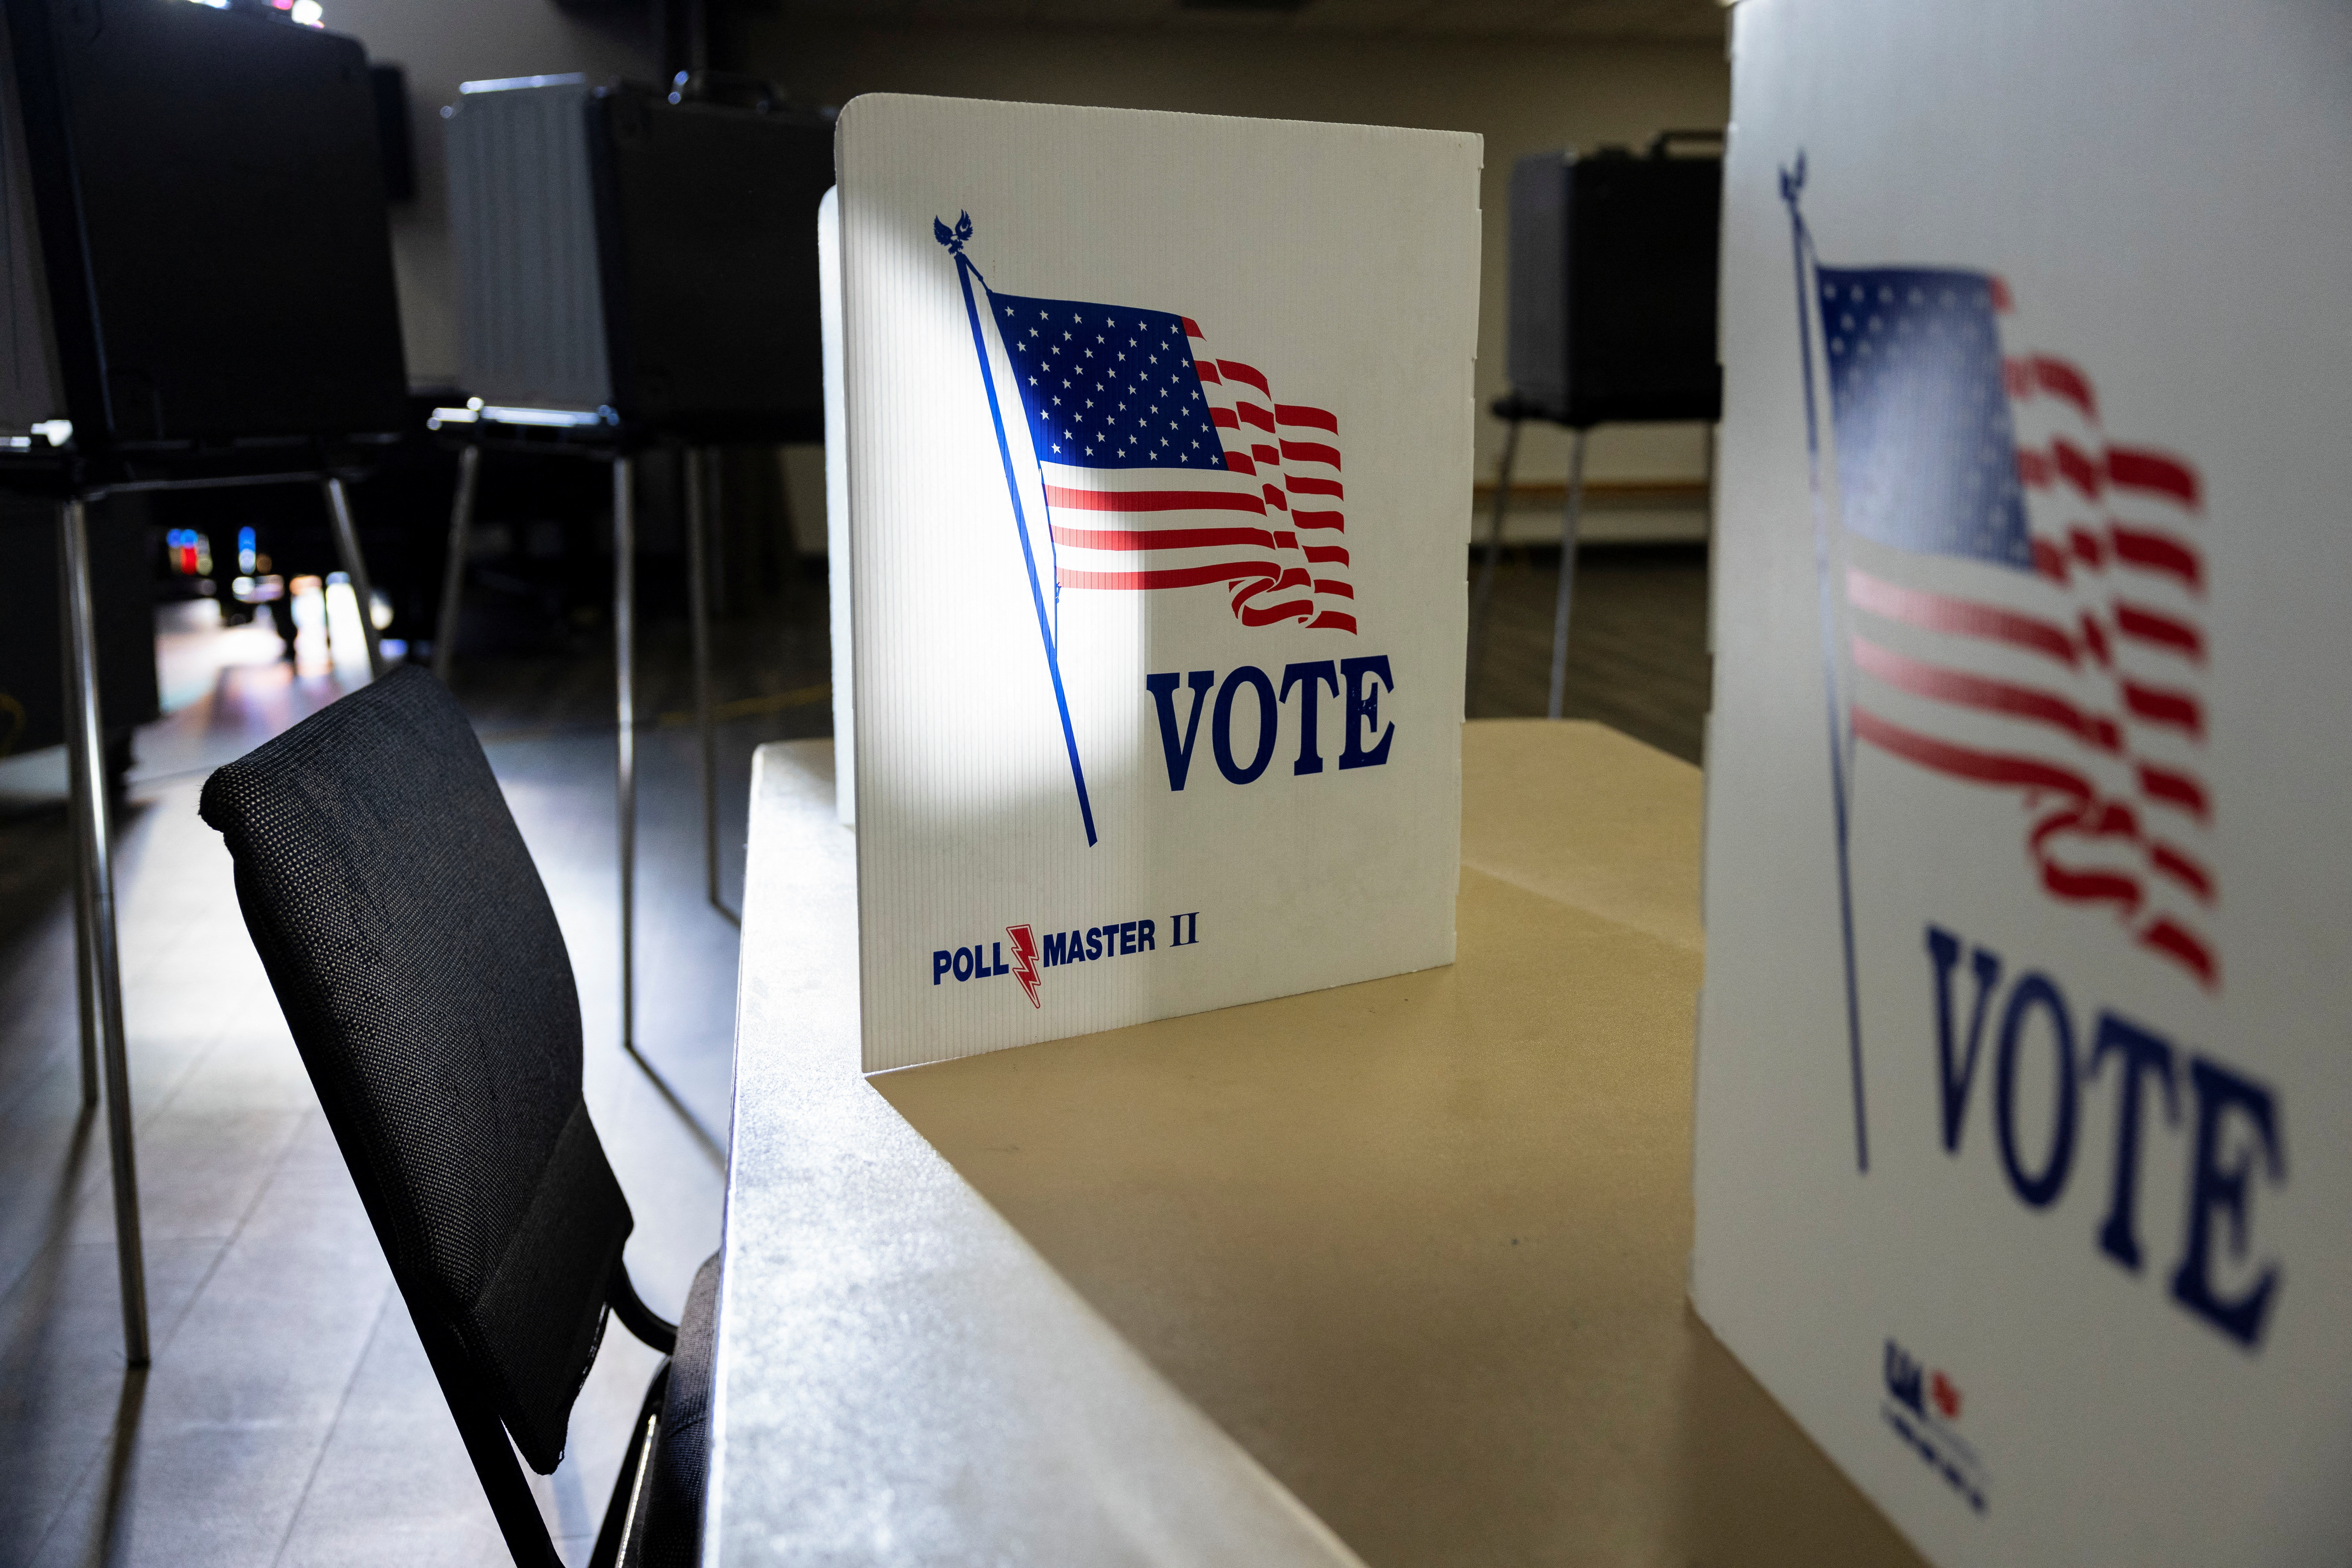 Democratic and Republican parties hold primary elections in Ohio